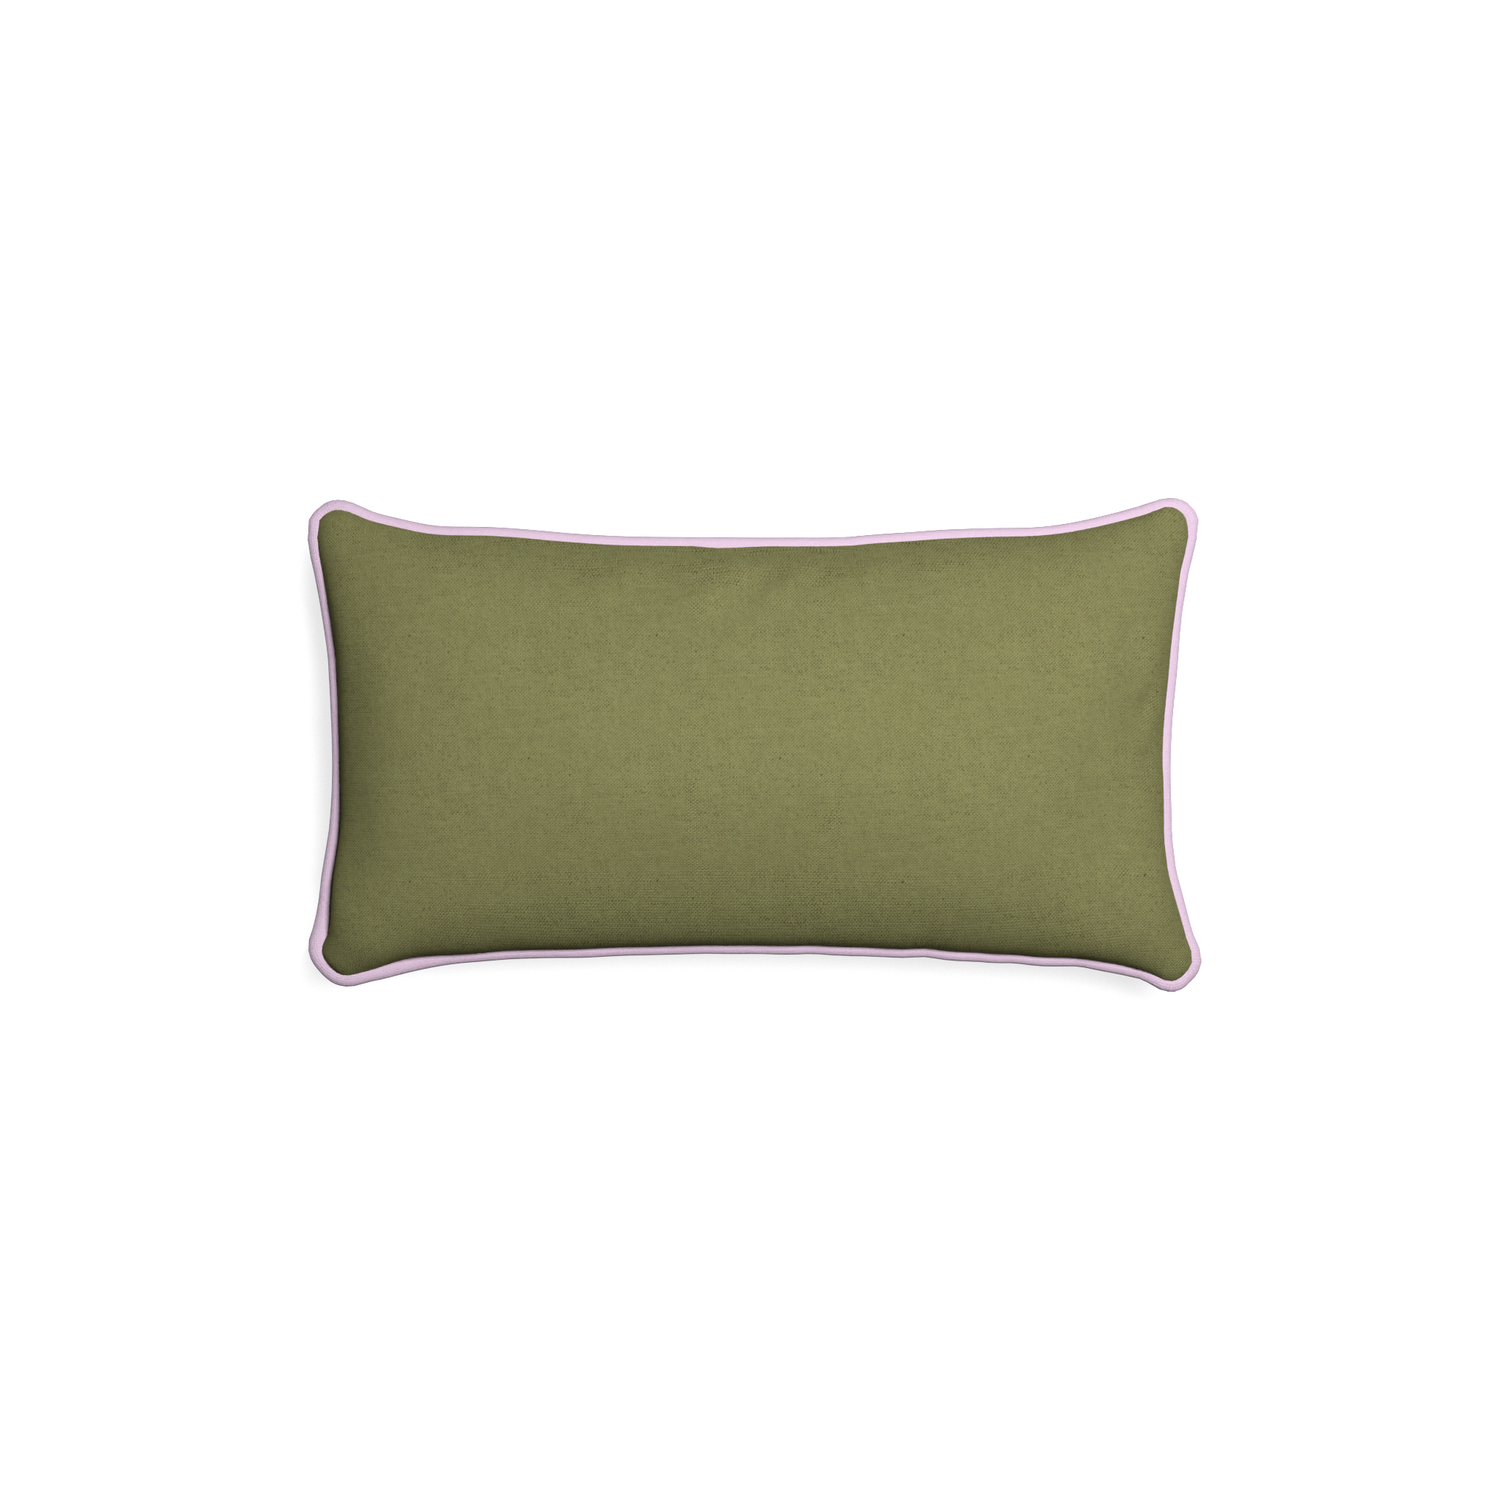 Petite-lumbar moss custom moss greenpillow with l piping on white background